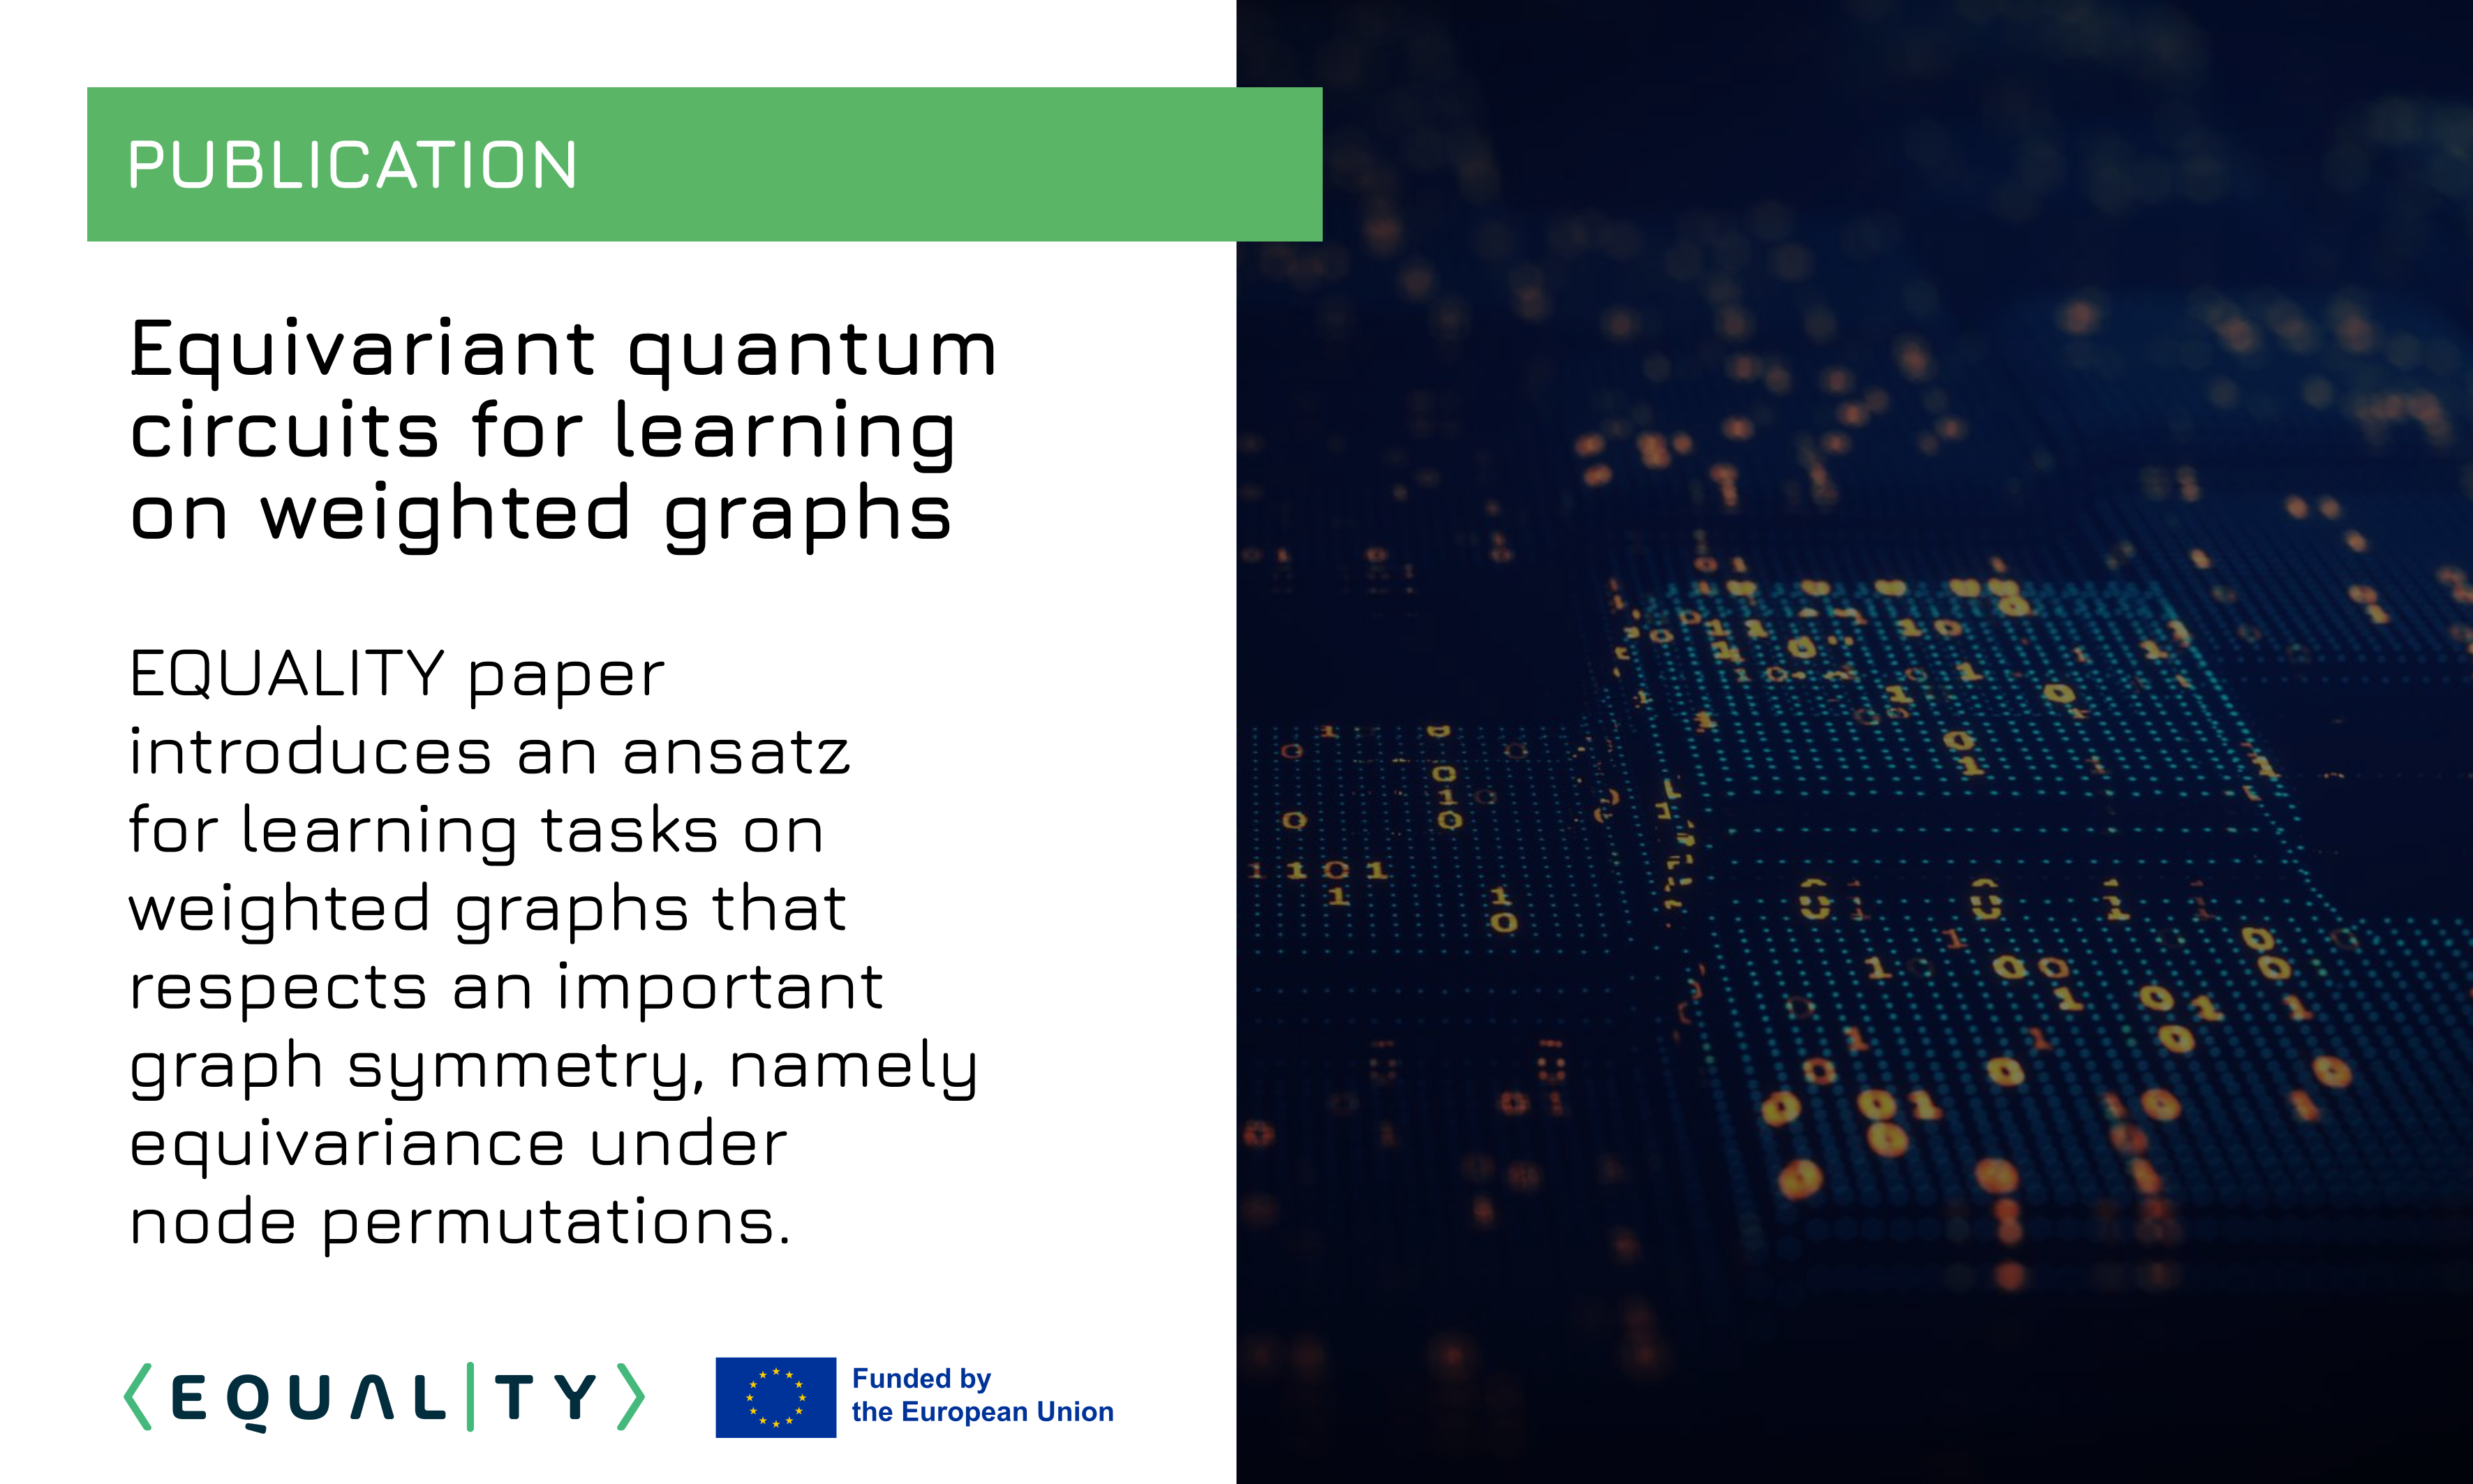 Equivariant quantum circuits for learning on weighted graphs